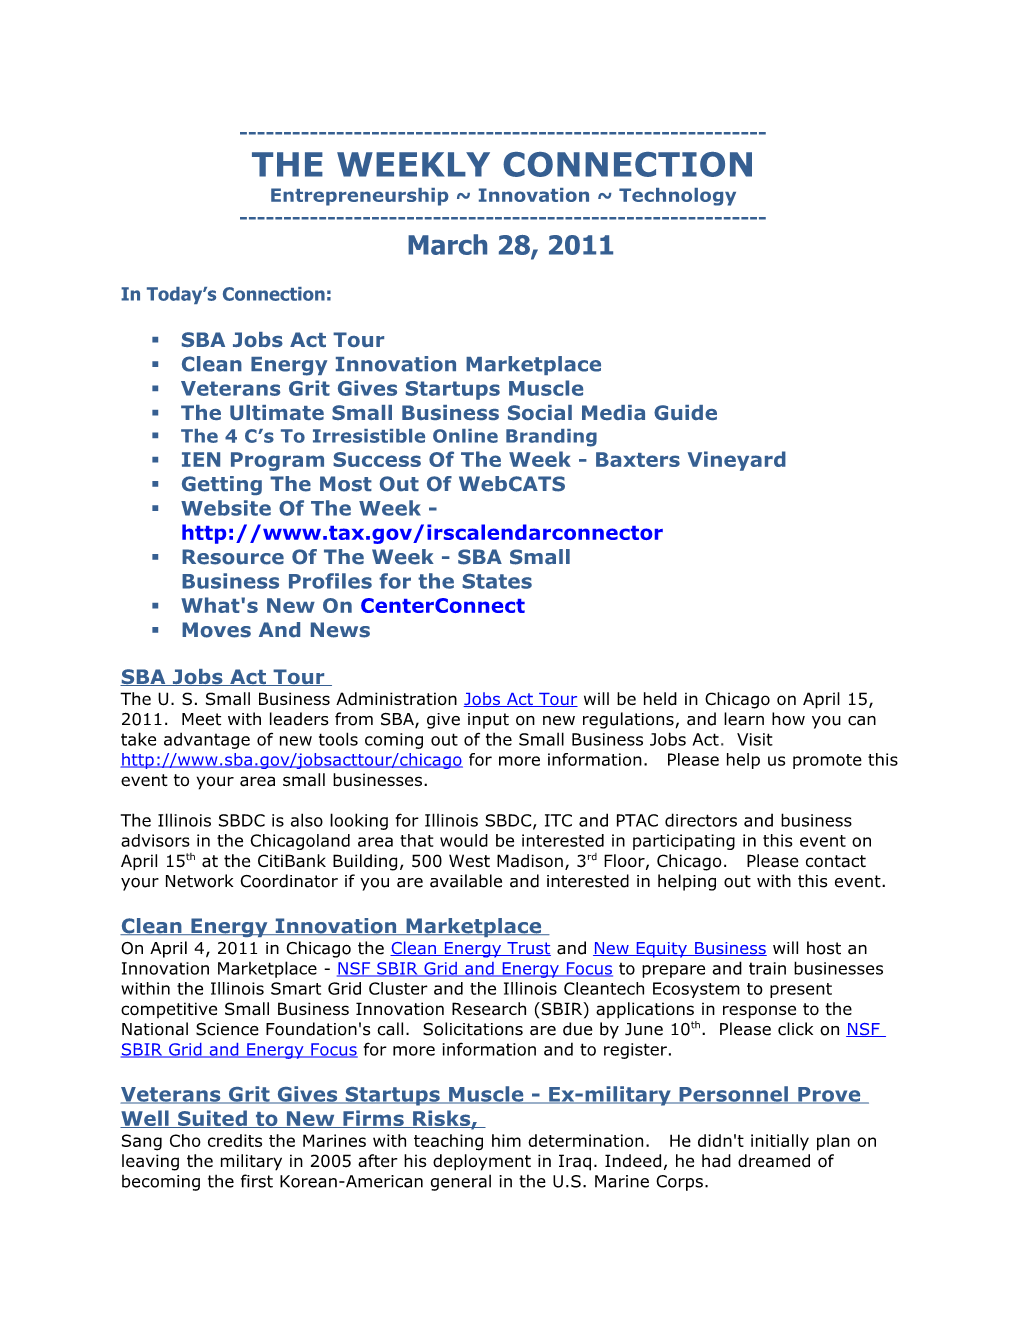 The Weekly Connection s2